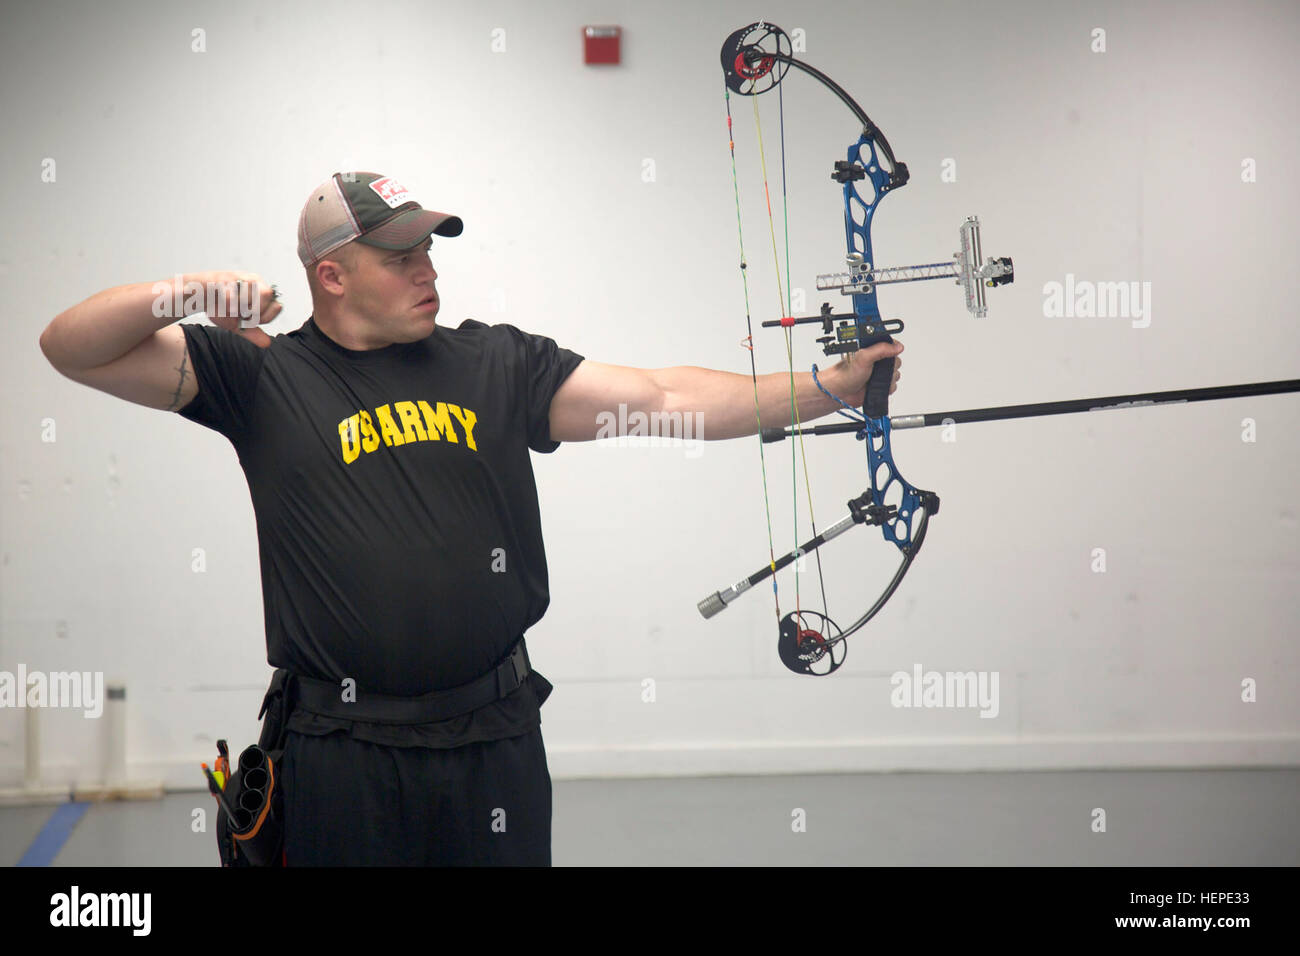 U.S. Army Reserves Sgt. Colten Harms, assigned to Fort Riley Warrior Transition Unit, follows through his release during archery training for the 2015 Department of Defense Warrior Games at Fort Belvoir, Va., June 4, 2015. Harms is one of more than 40 active duty and veteran athletes training at Fort Belvoir to represent Team Army in the DoD Warrior Games held at Marine Corps Base, Quantico, Va., June 19-28. The 2015 DoD Warrior Games is an adaptive sports competition for wounded, ill and injured service members and veterans. Approximately 250 athletes, representing teams from the Army, Marine Stock Photo